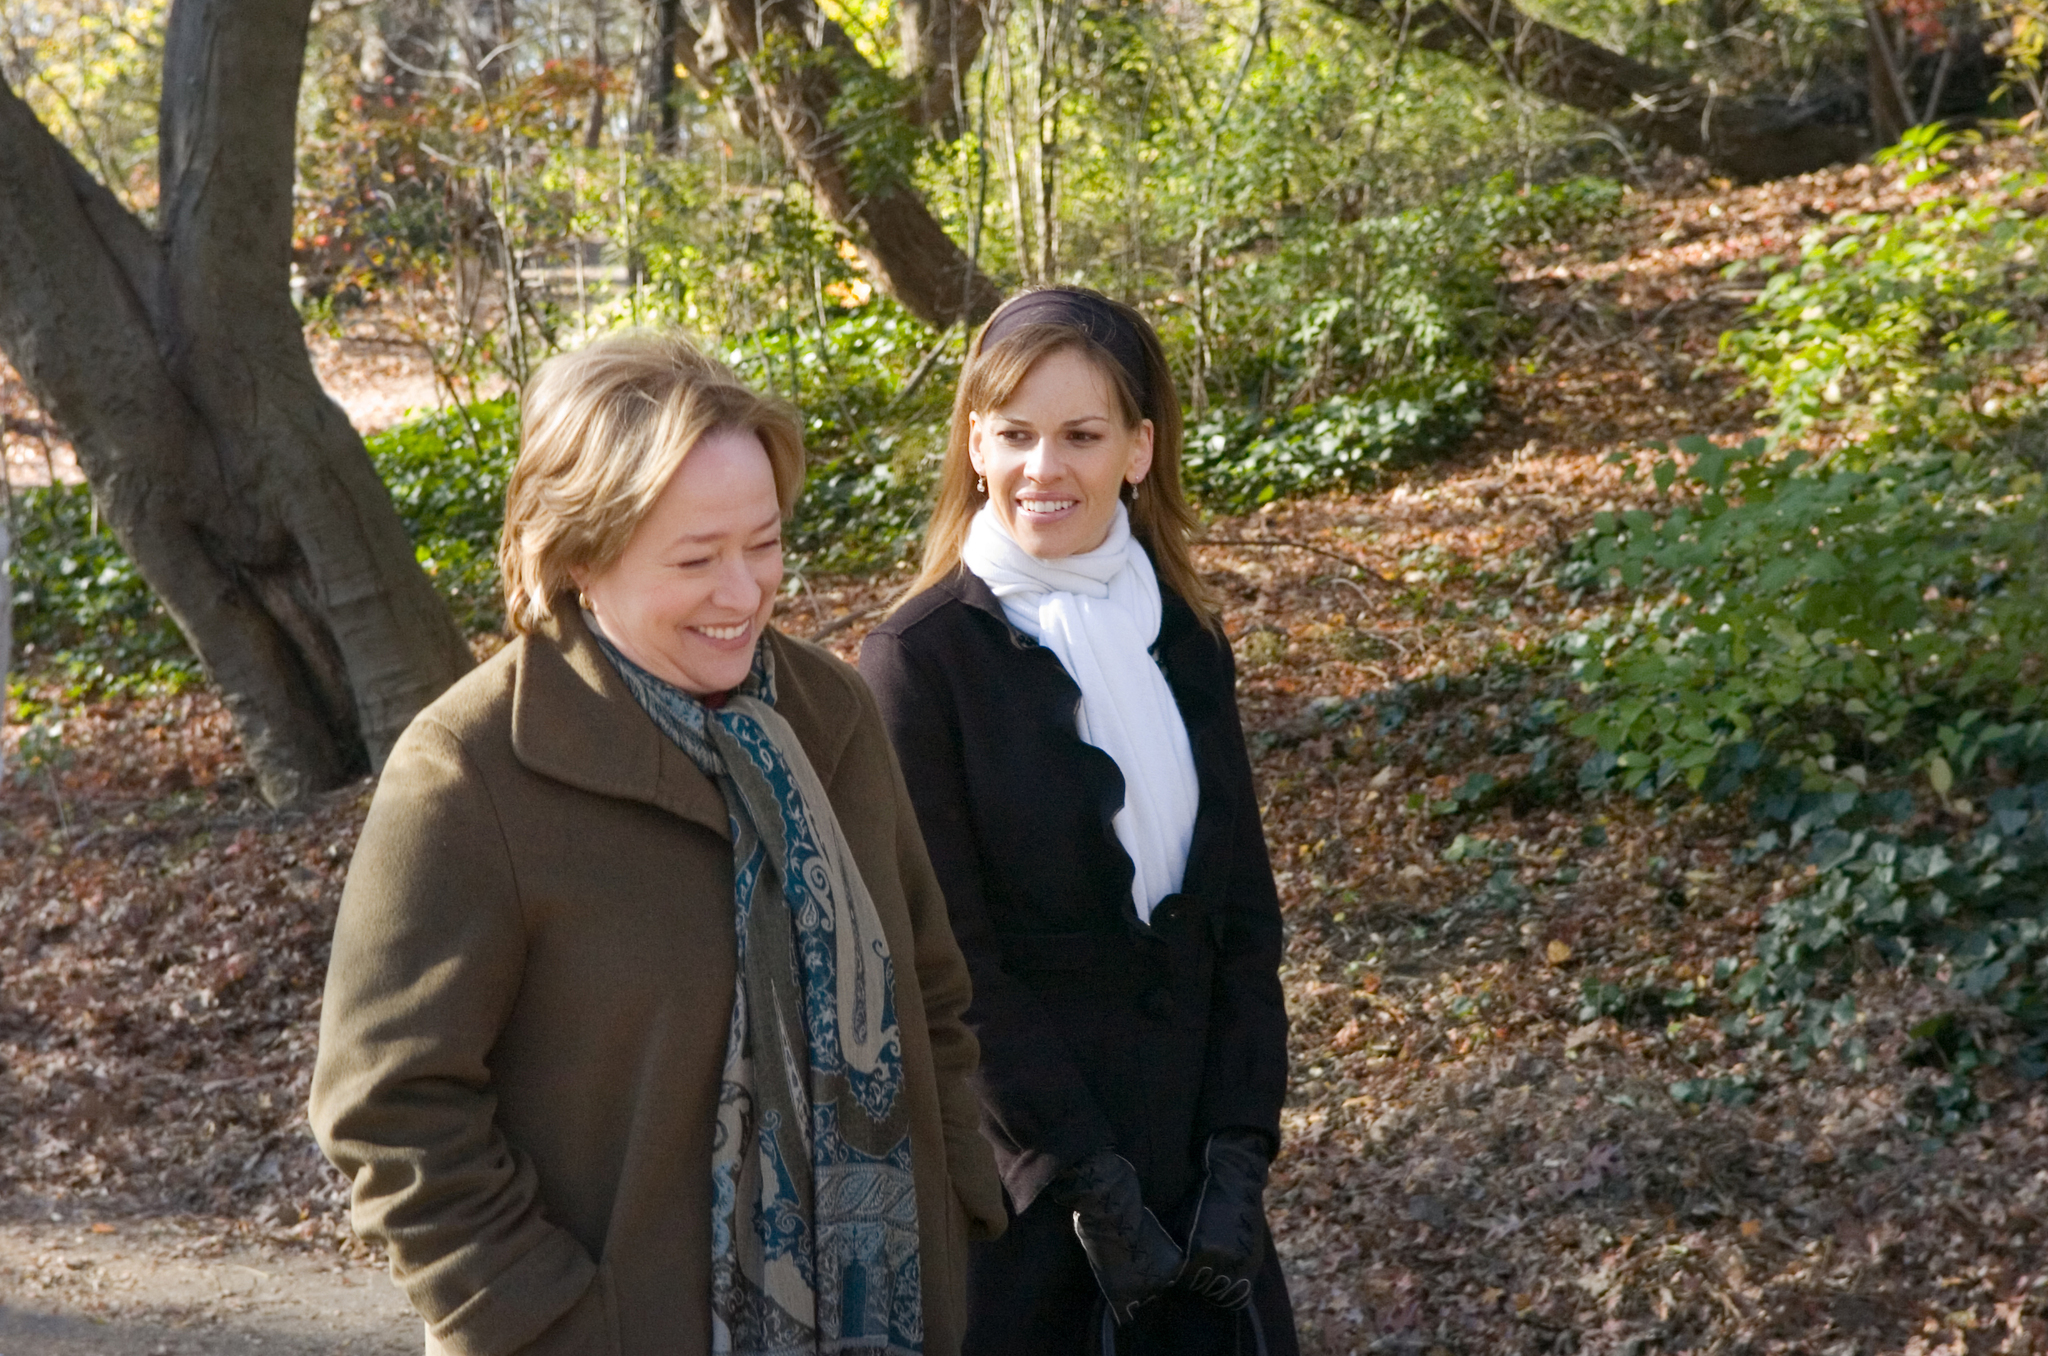 Still of Kathy Bates and Hilary Swank in P.S. Myliu tave (2007)